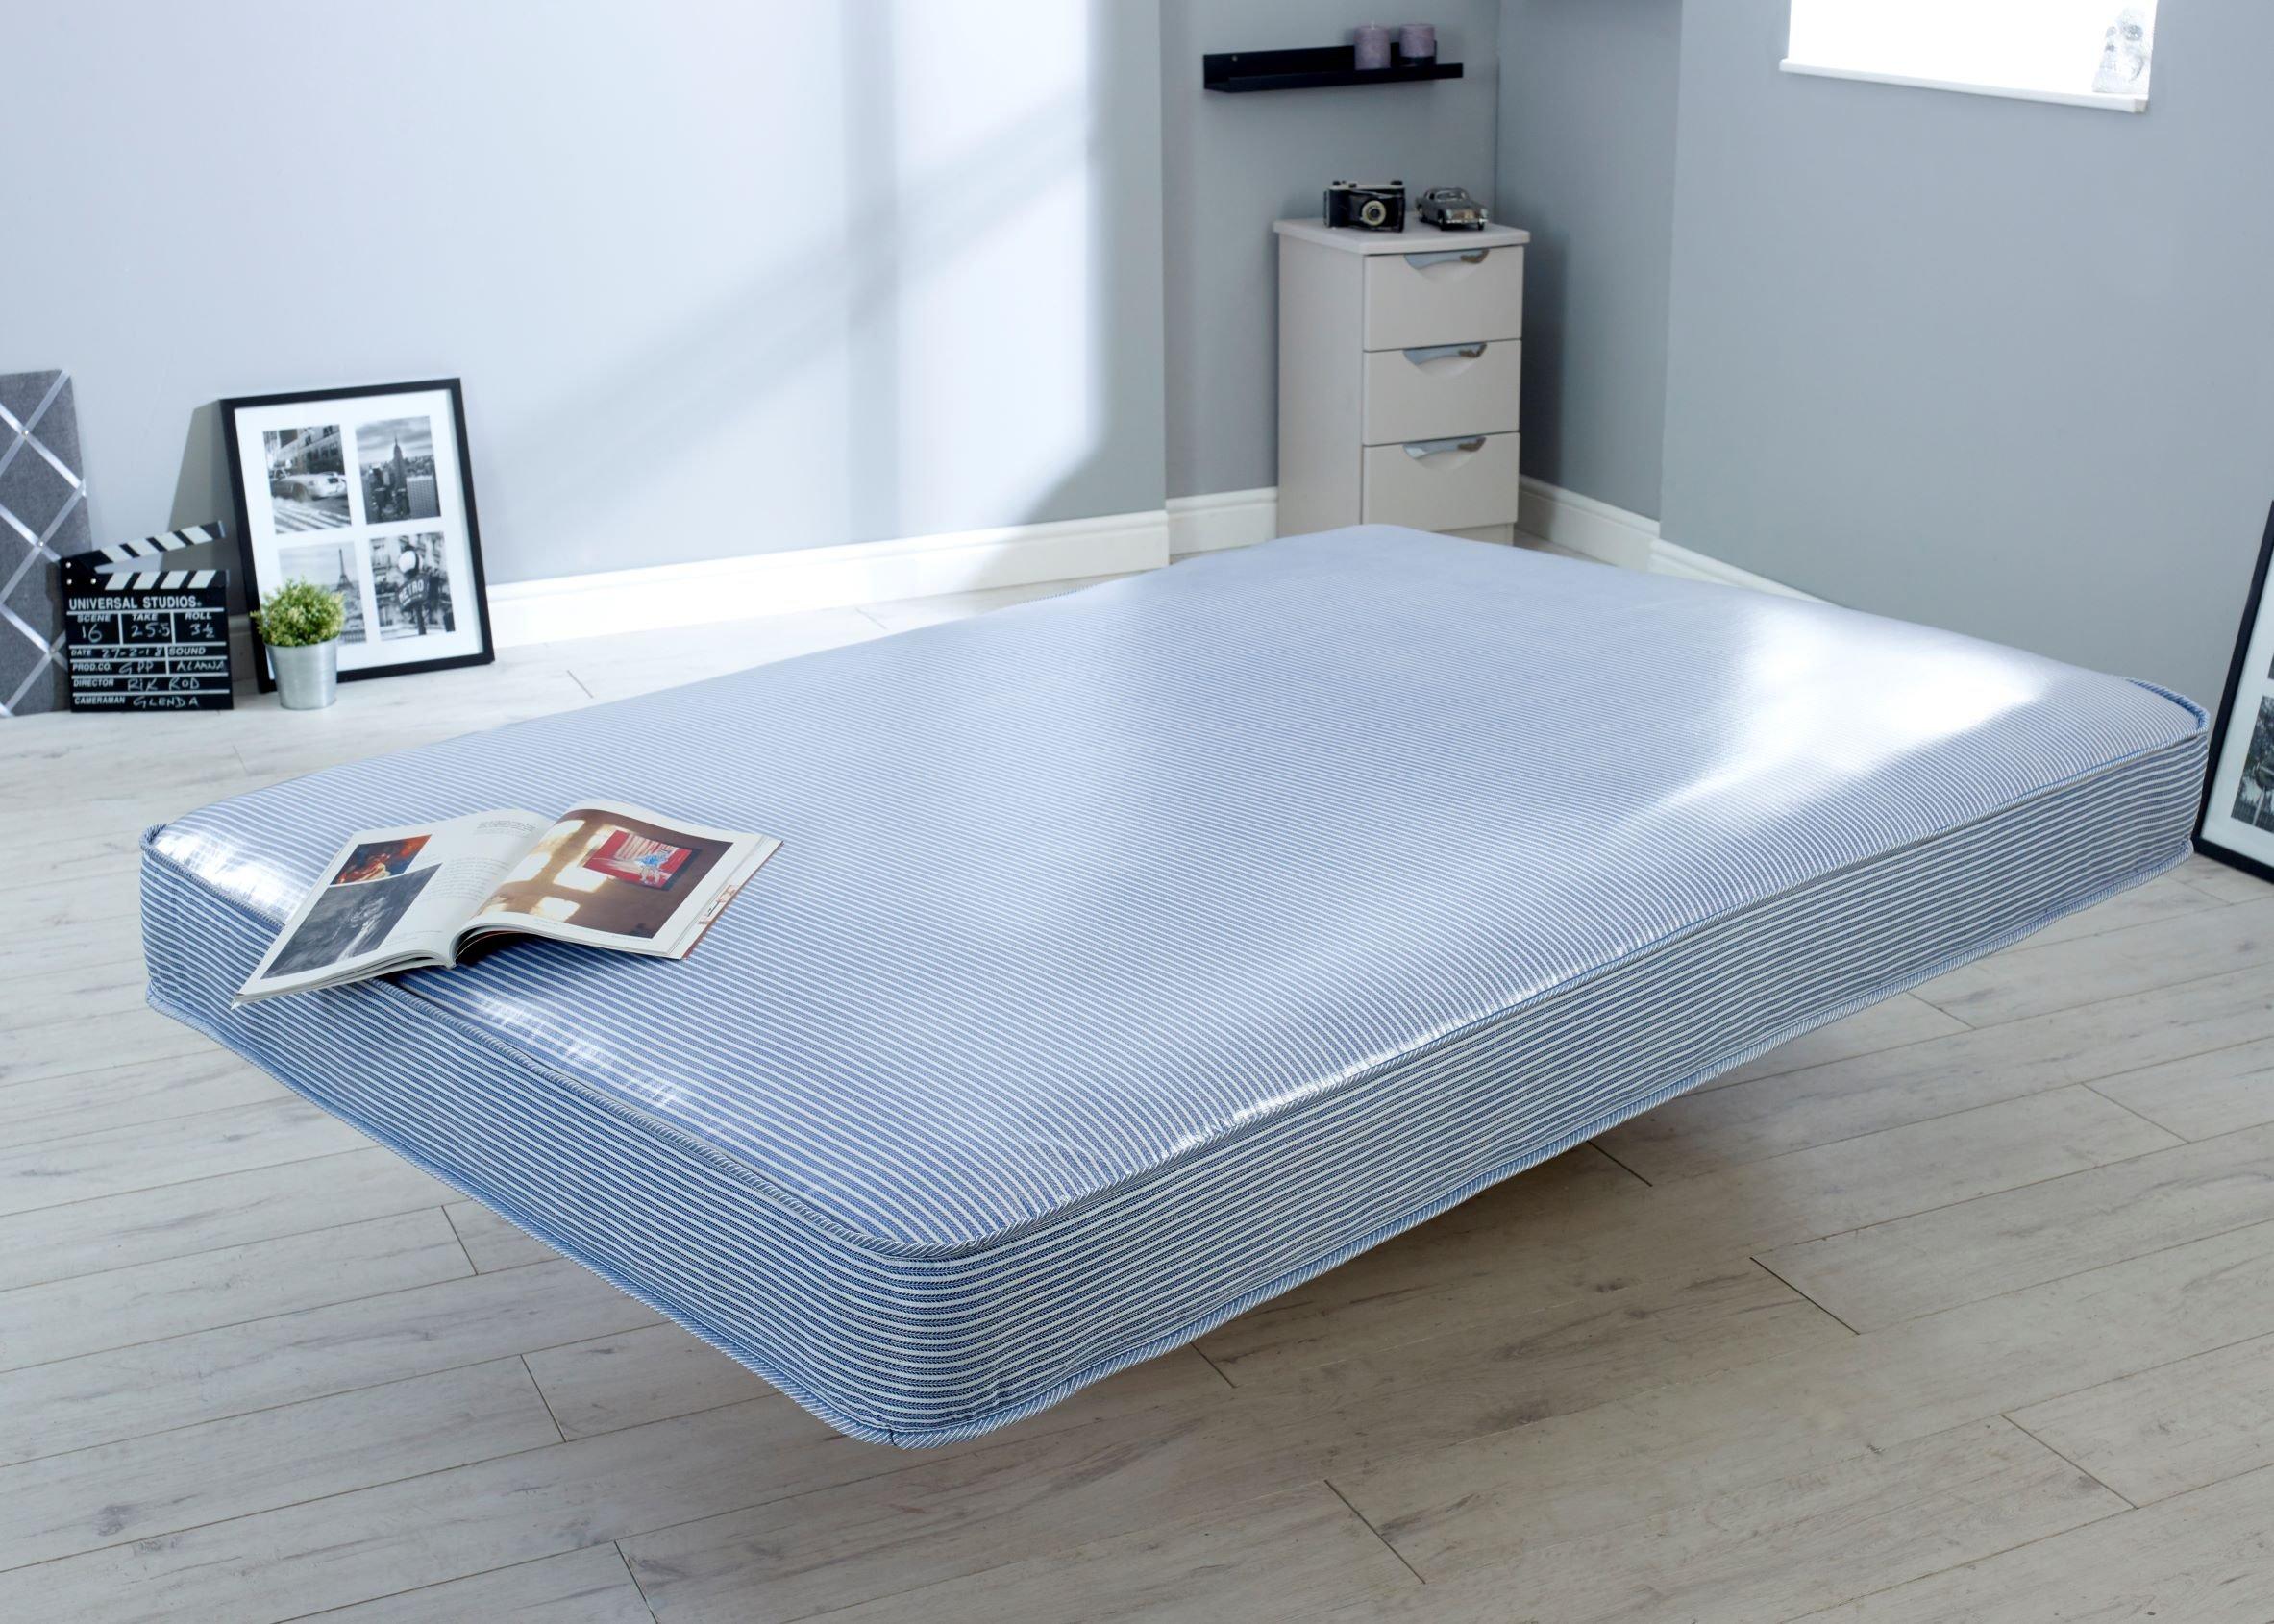 Waterproof PVC Spring Mattress - Great for Cabin Beds and Bunk Beds